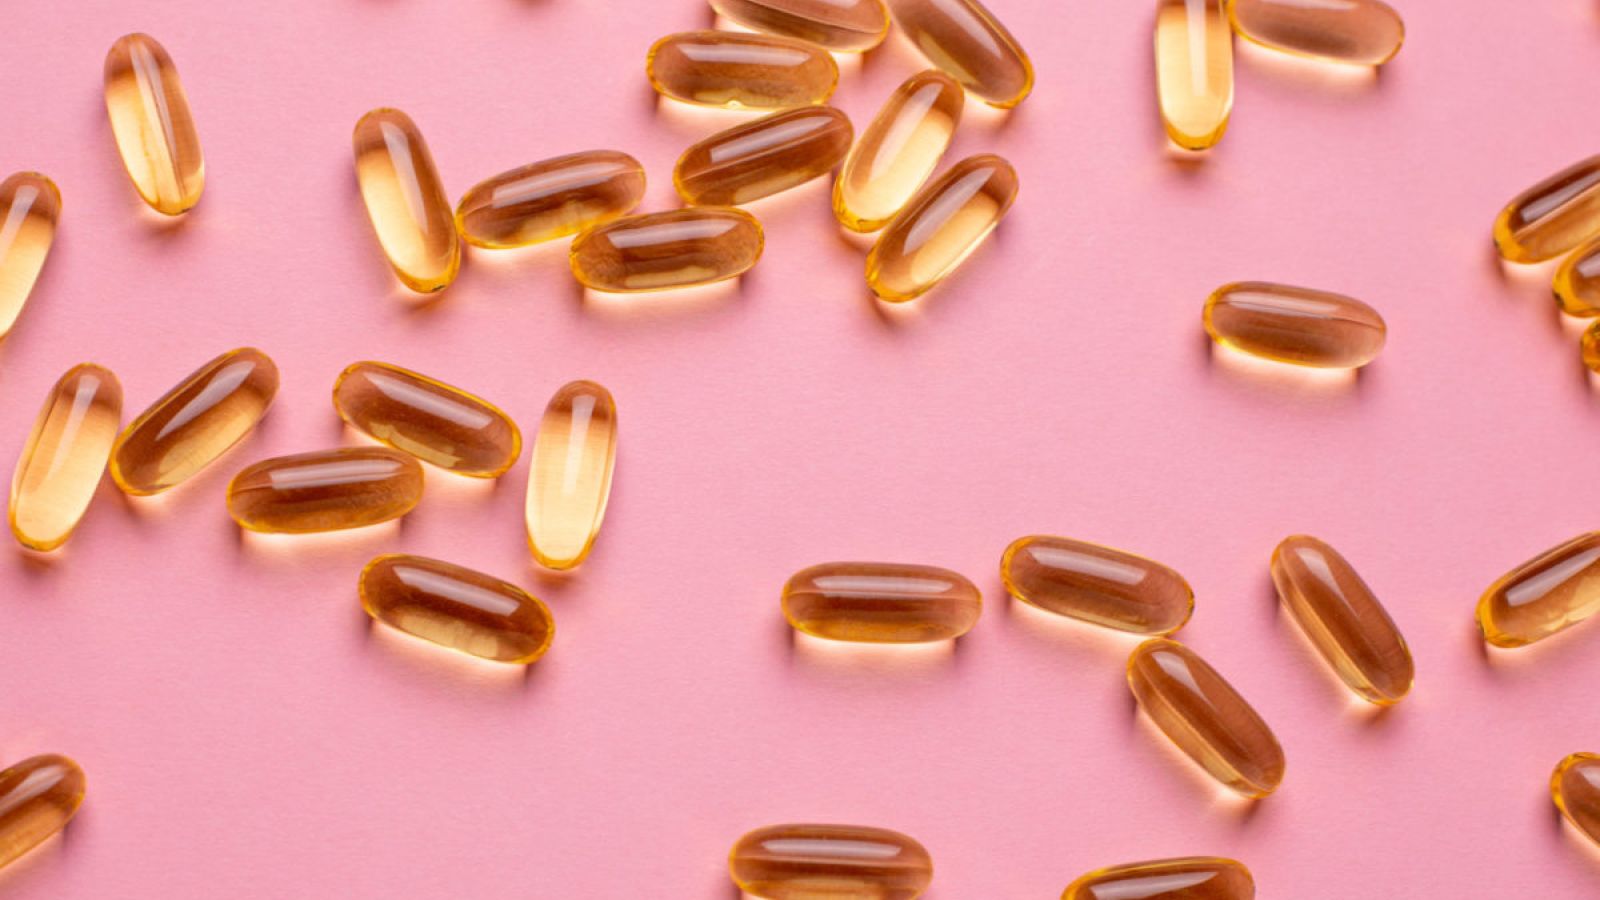 Supplements before pregnancy can boost fertility and close key nutrient gaps